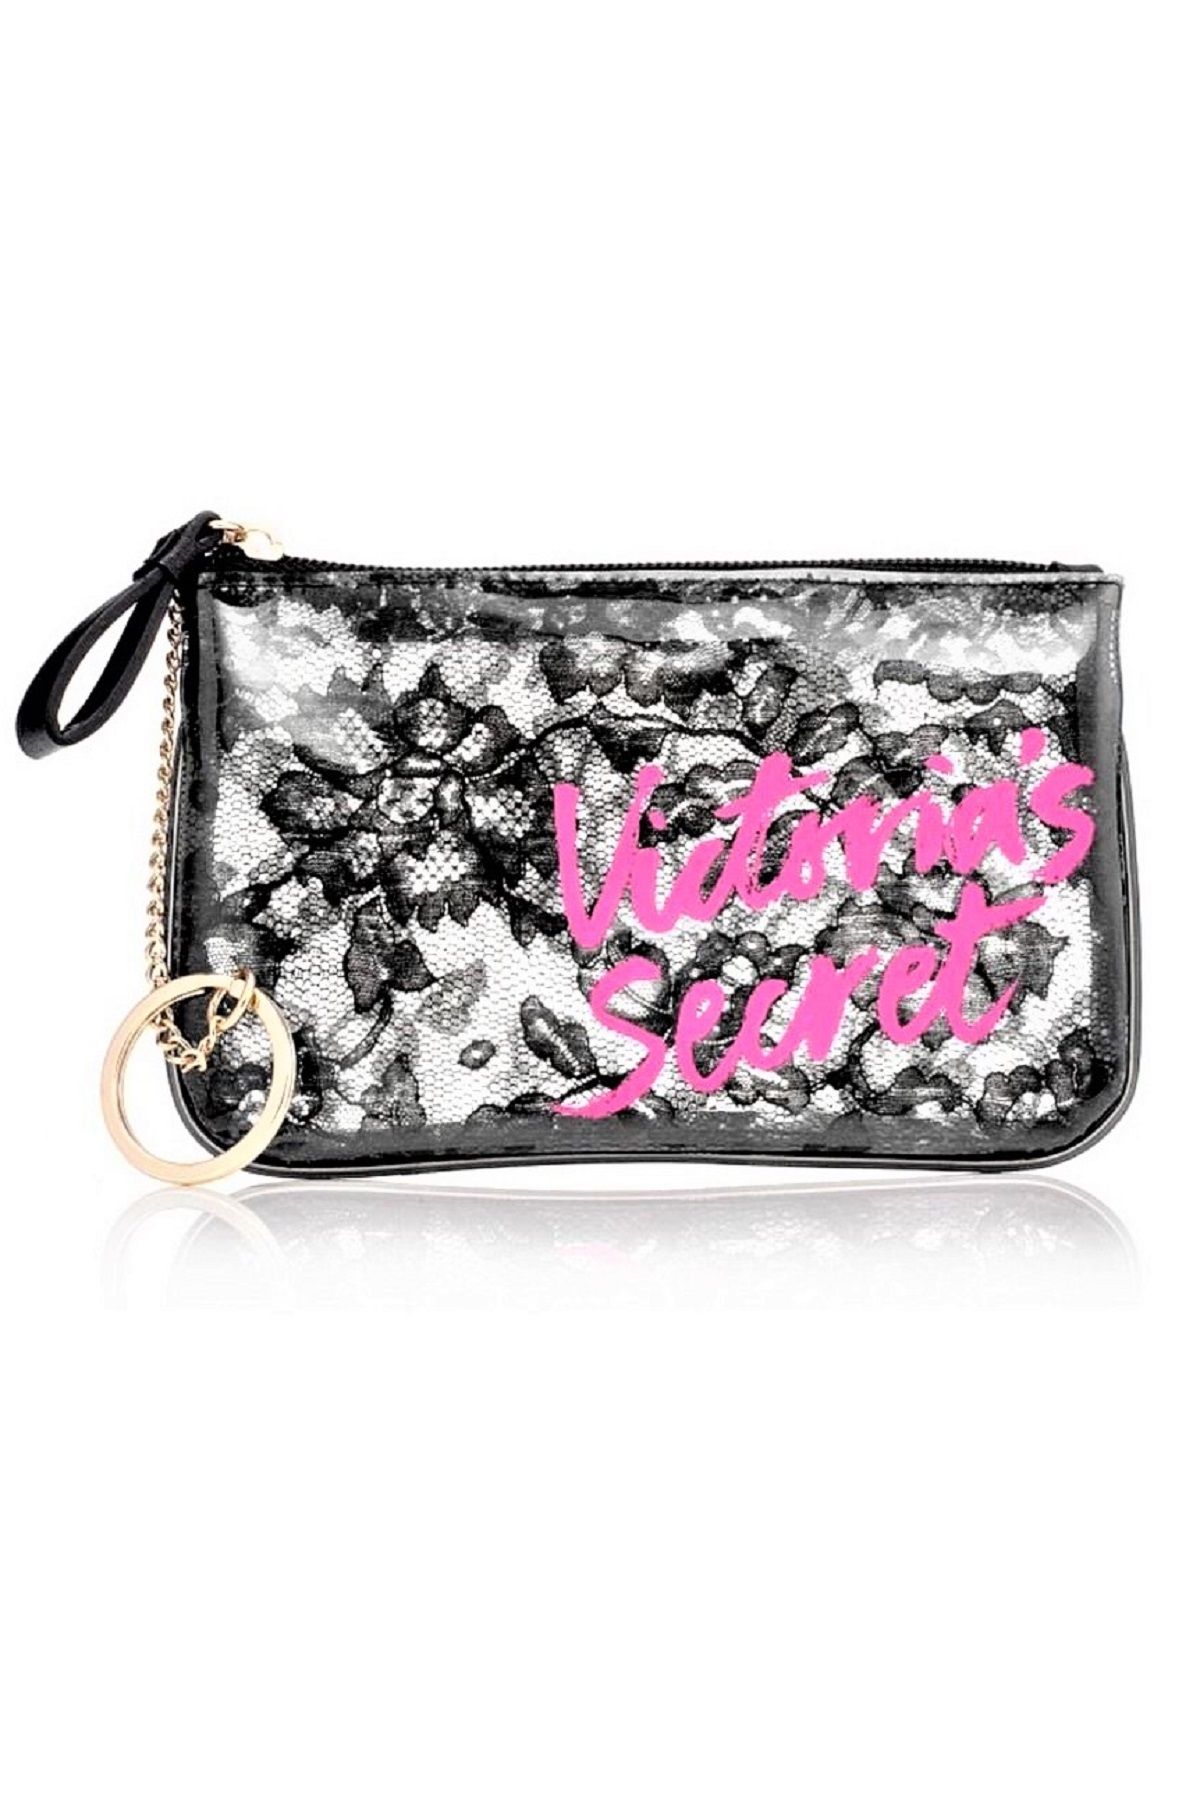 Pink Signature Card Holder Case Keychain Wallet New Coin Purse VS -  AliExpress